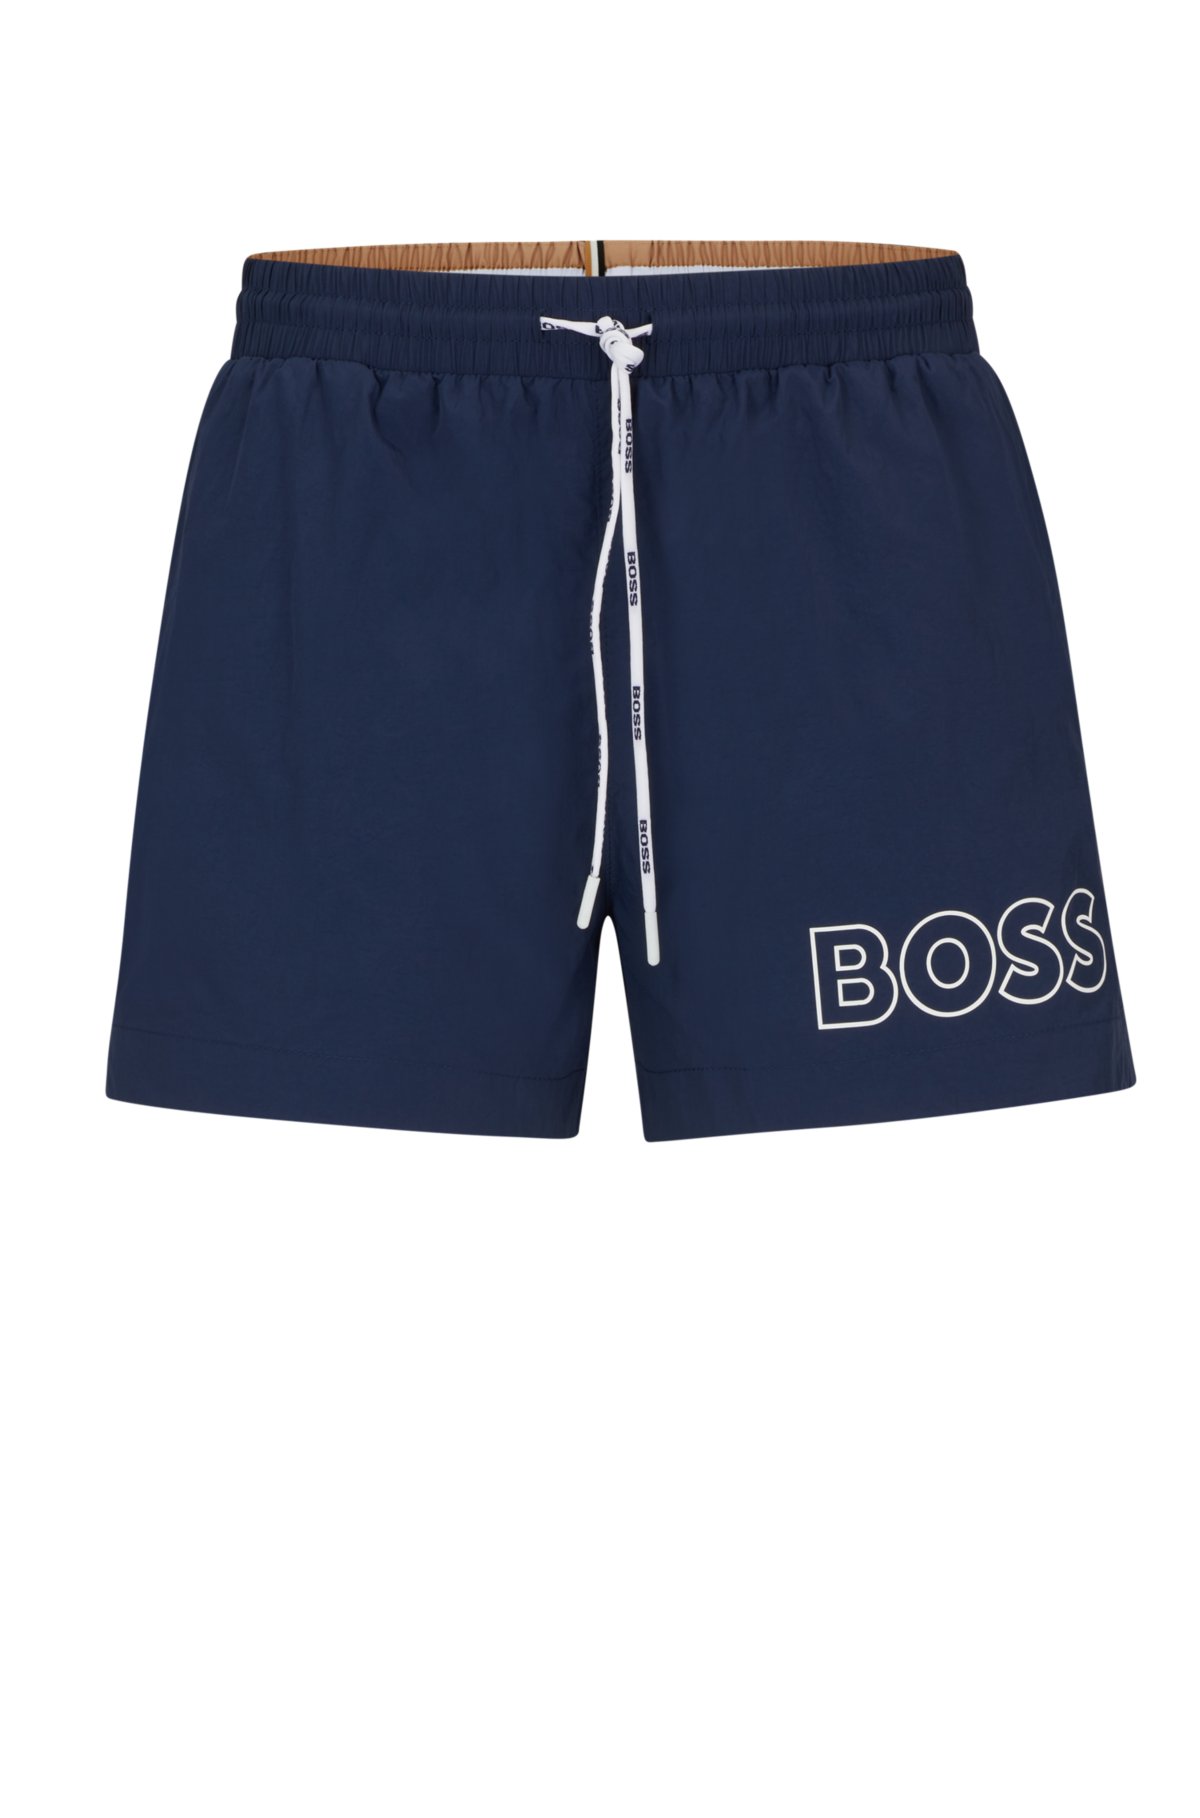 BOSS - Quick-drying swim shorts with outline logo